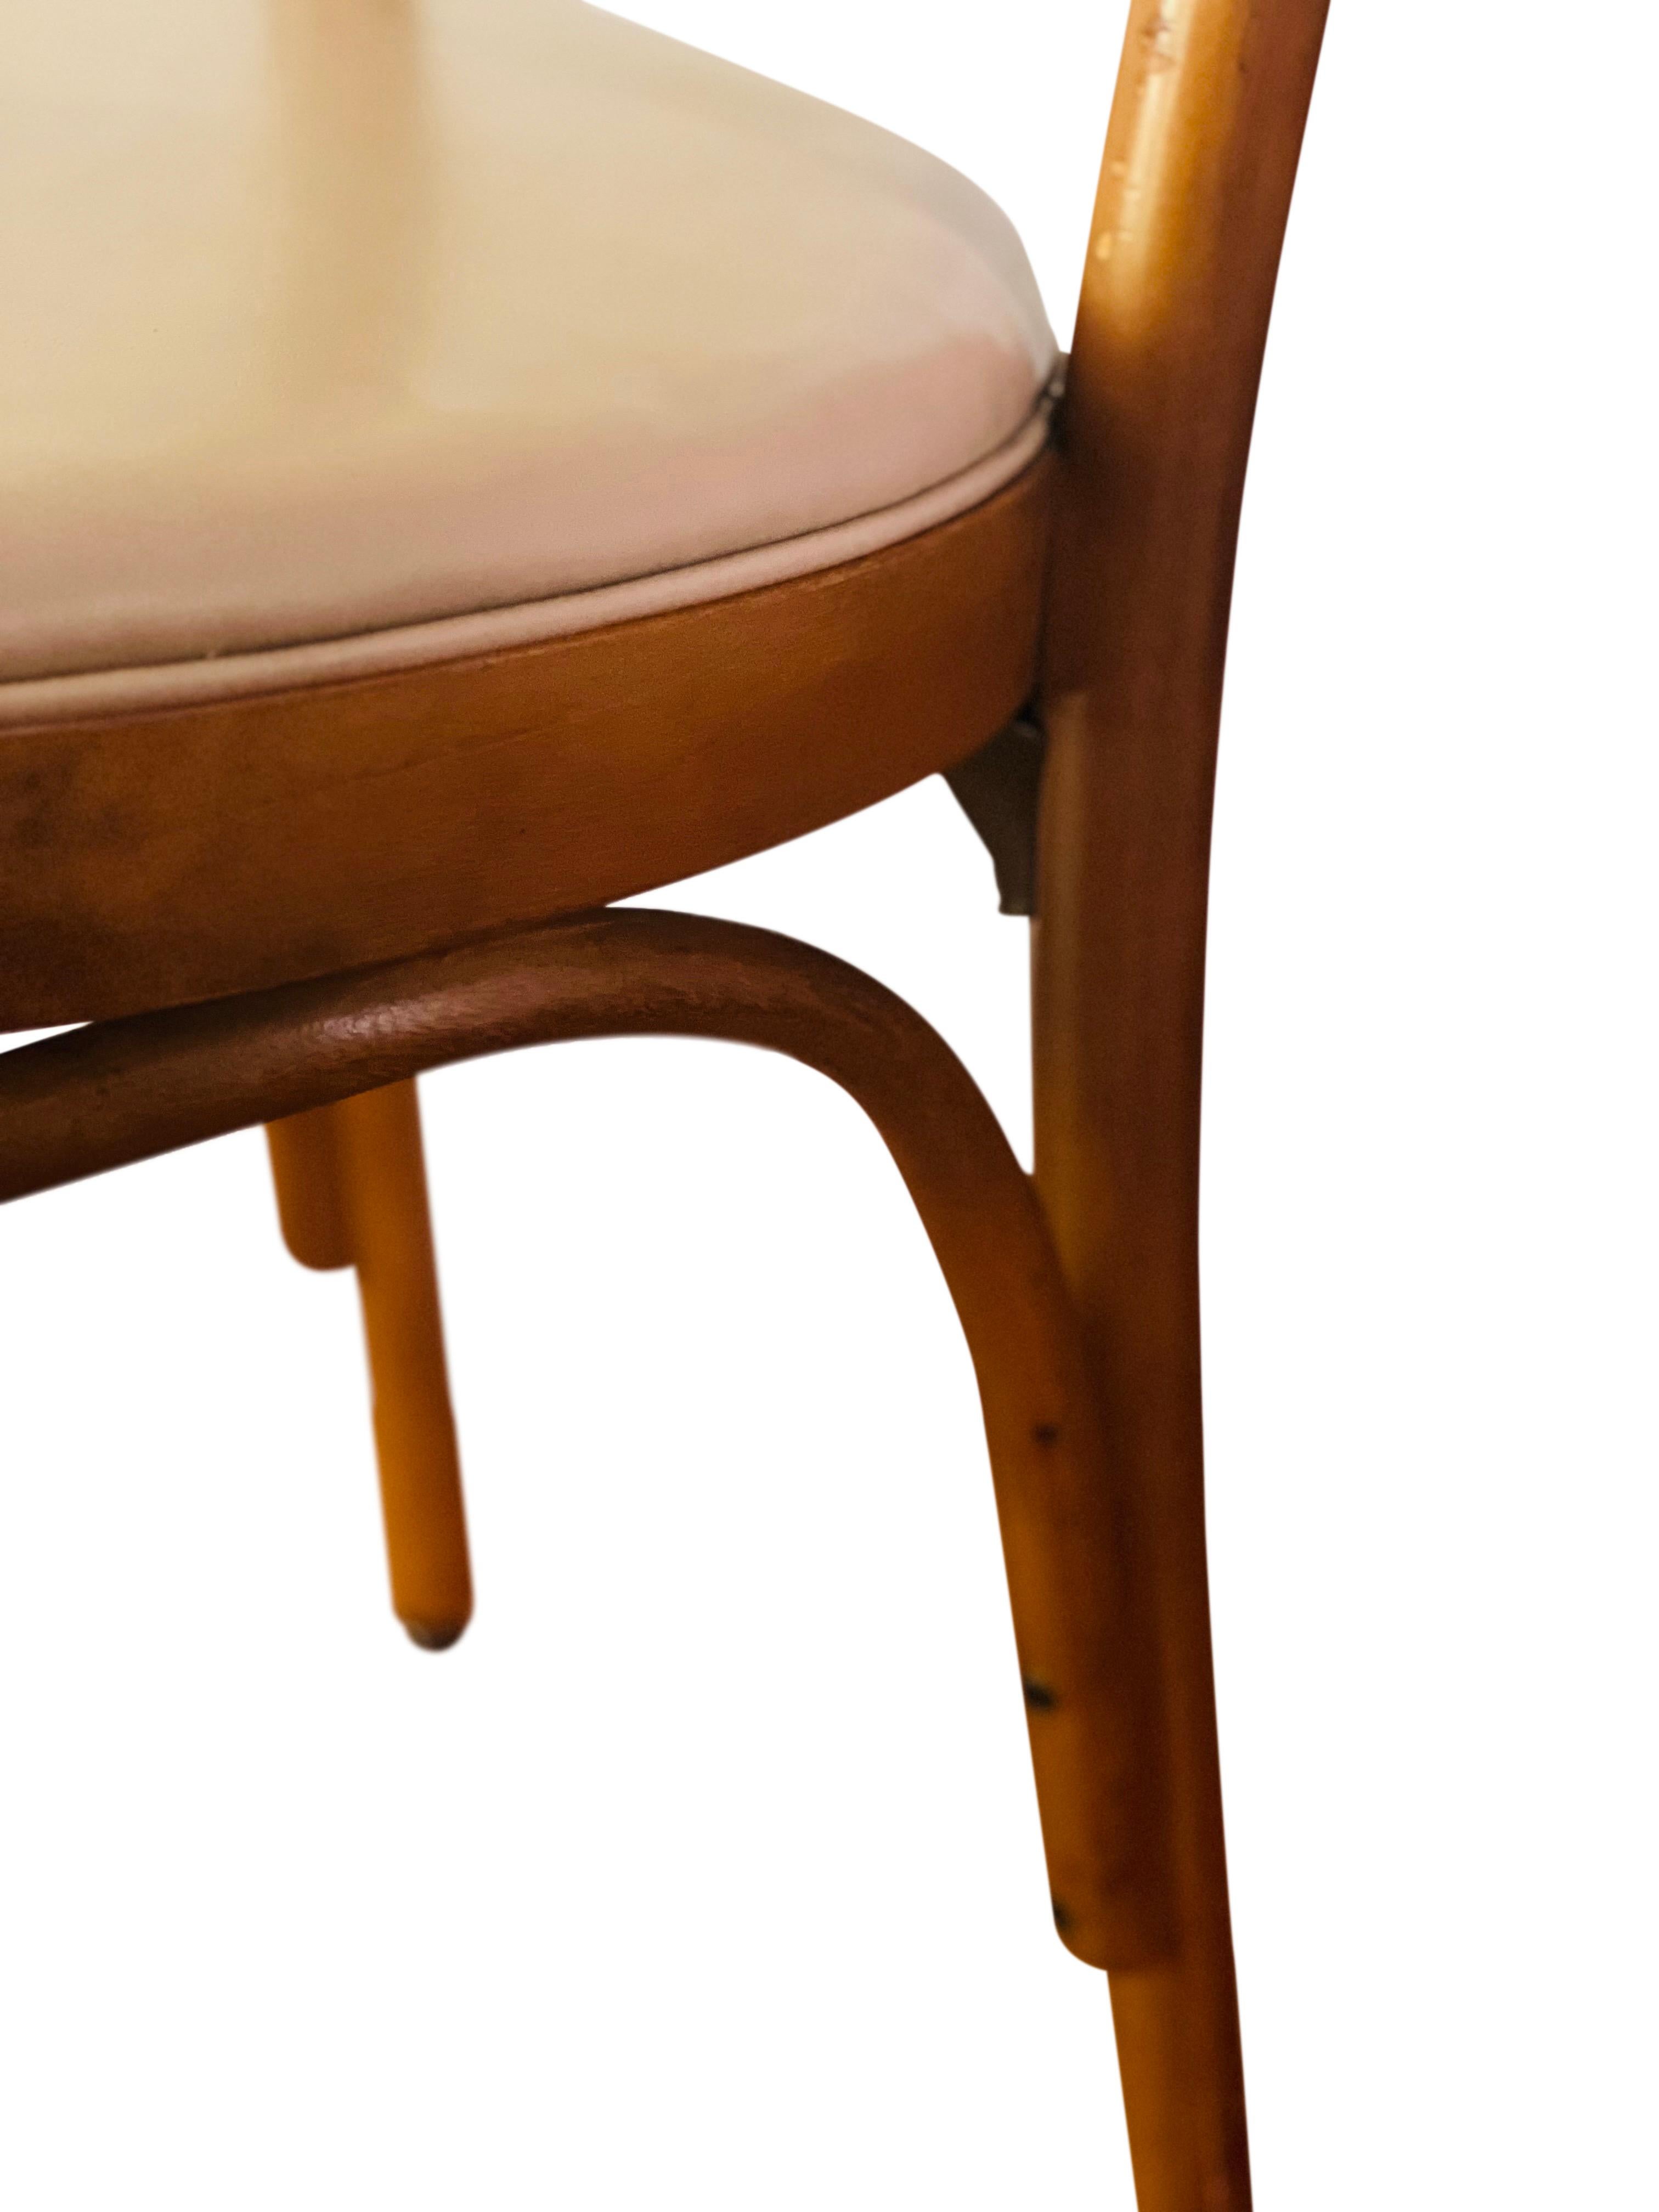 Midcentury Thonet Bentwood Upholstered Chair In Good Condition For Sale In Doylestown, PA